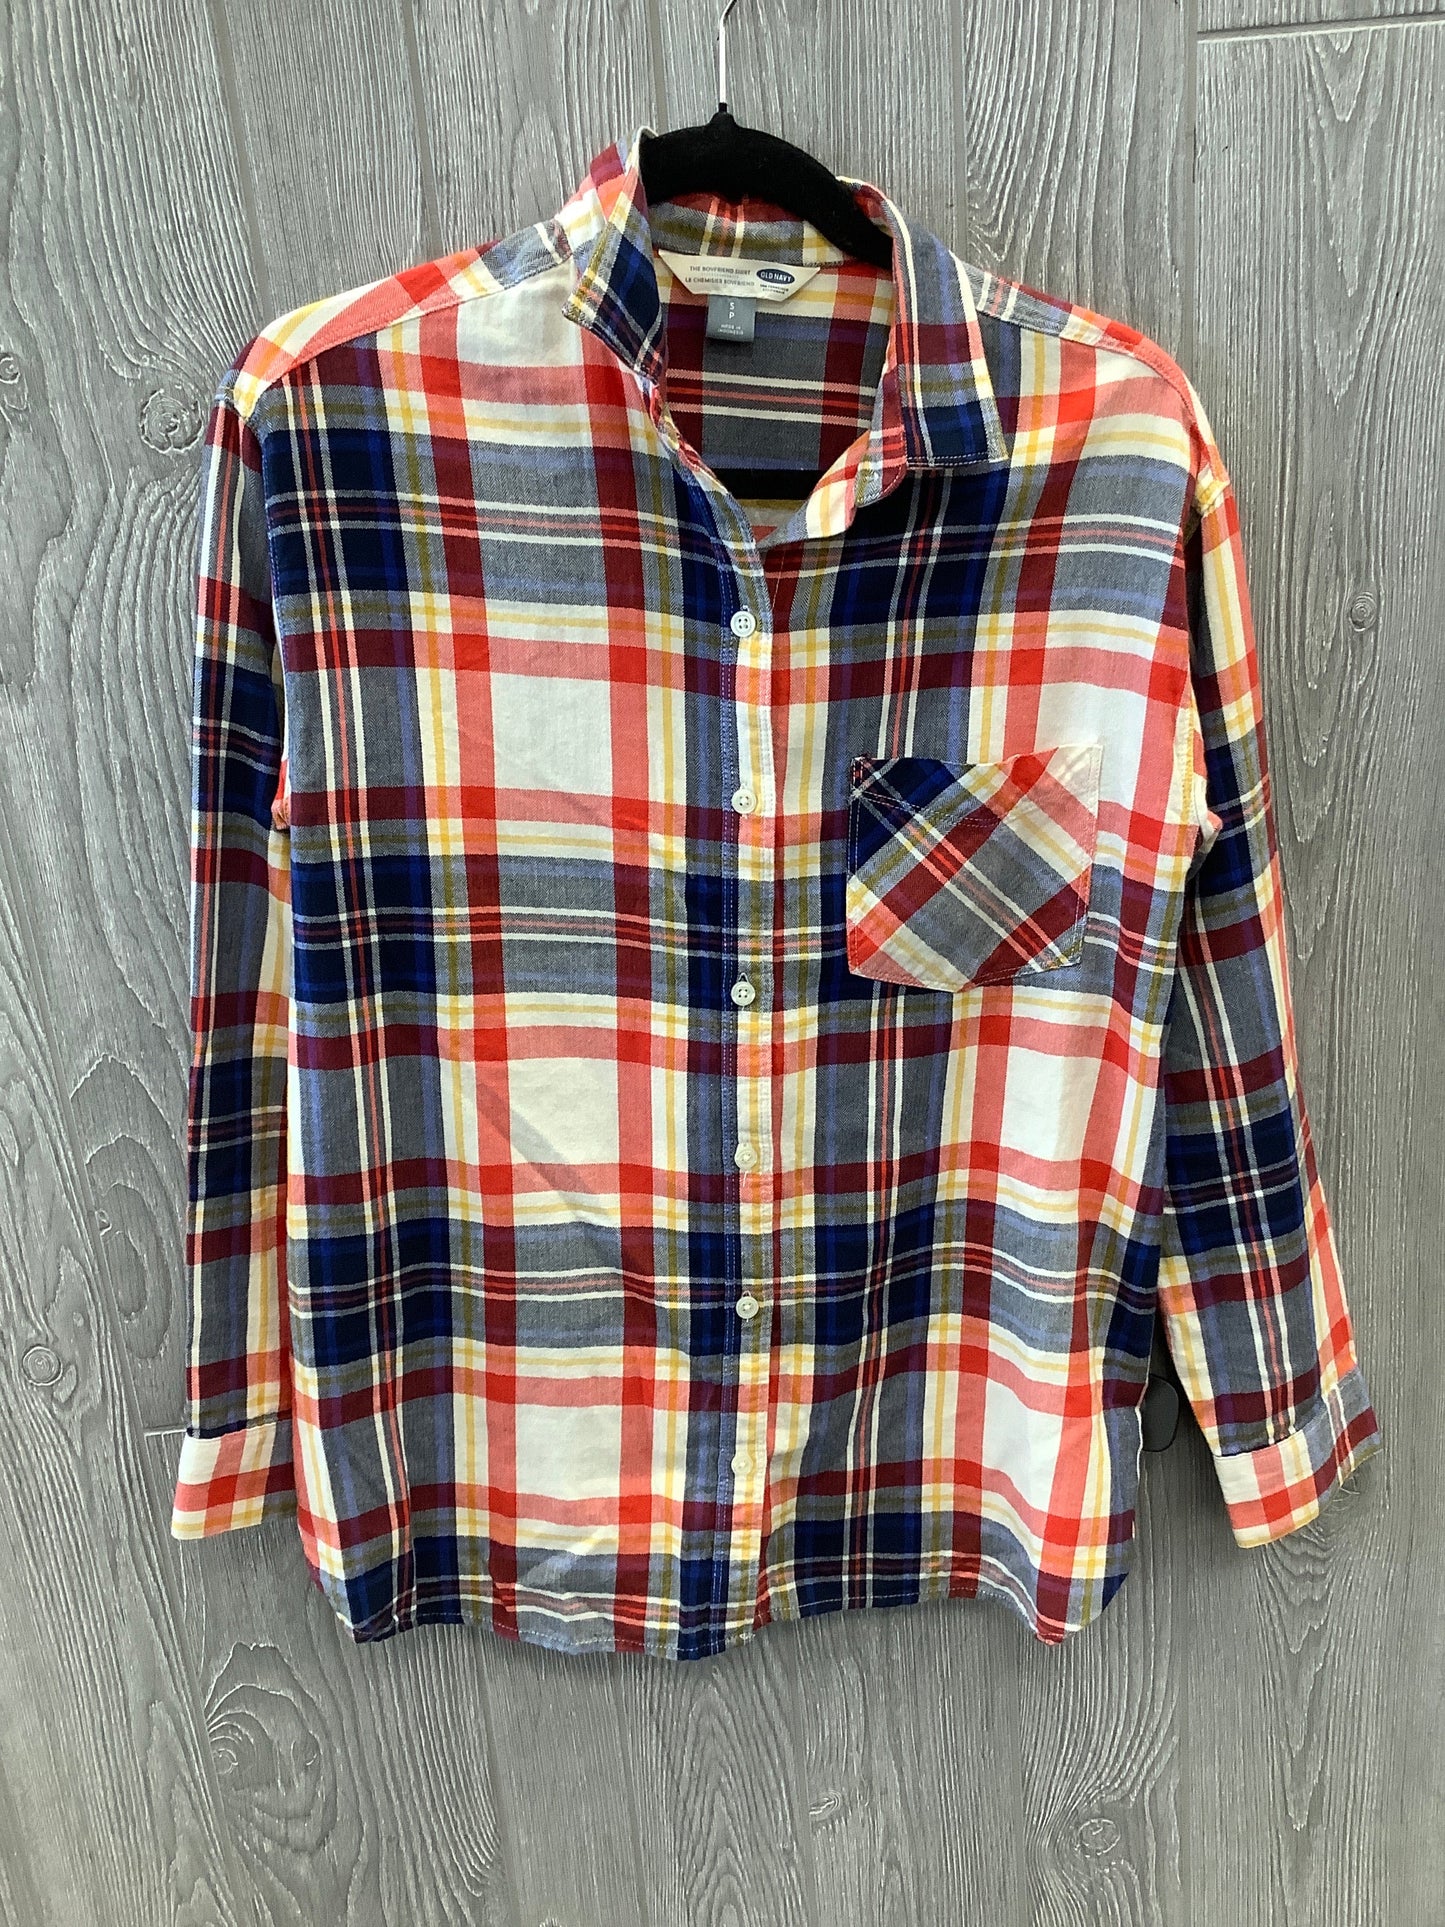 Plaid Pattern Top Long Sleeve Old Navy, Size S